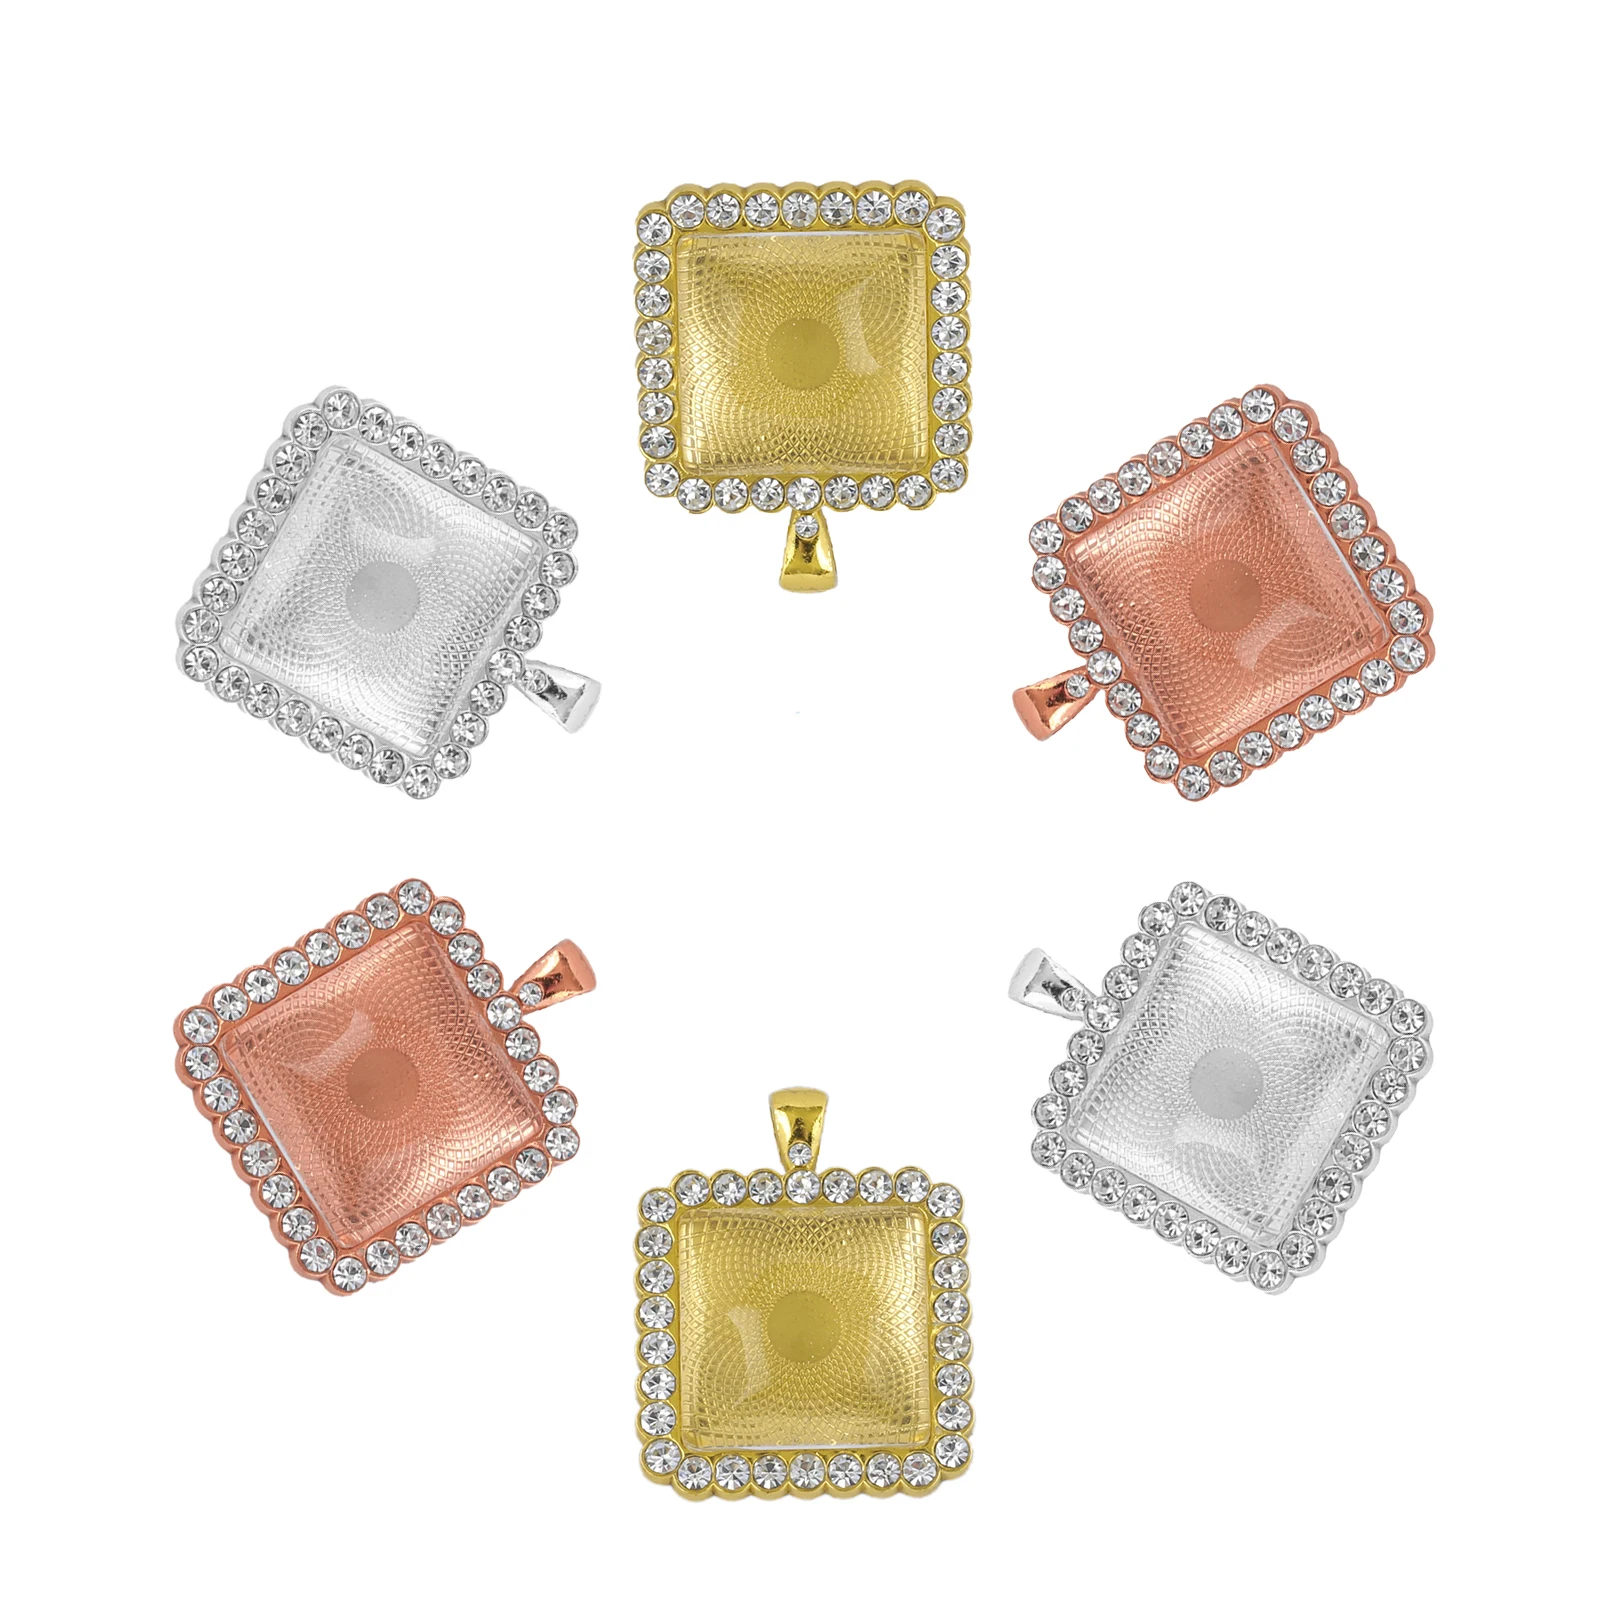 50pcs/Lot 25mm Square Tray Charms Bezel Pendant Setting For DIY Making Necklace Bracelet Keychain Jewelry Wholesale TYR009